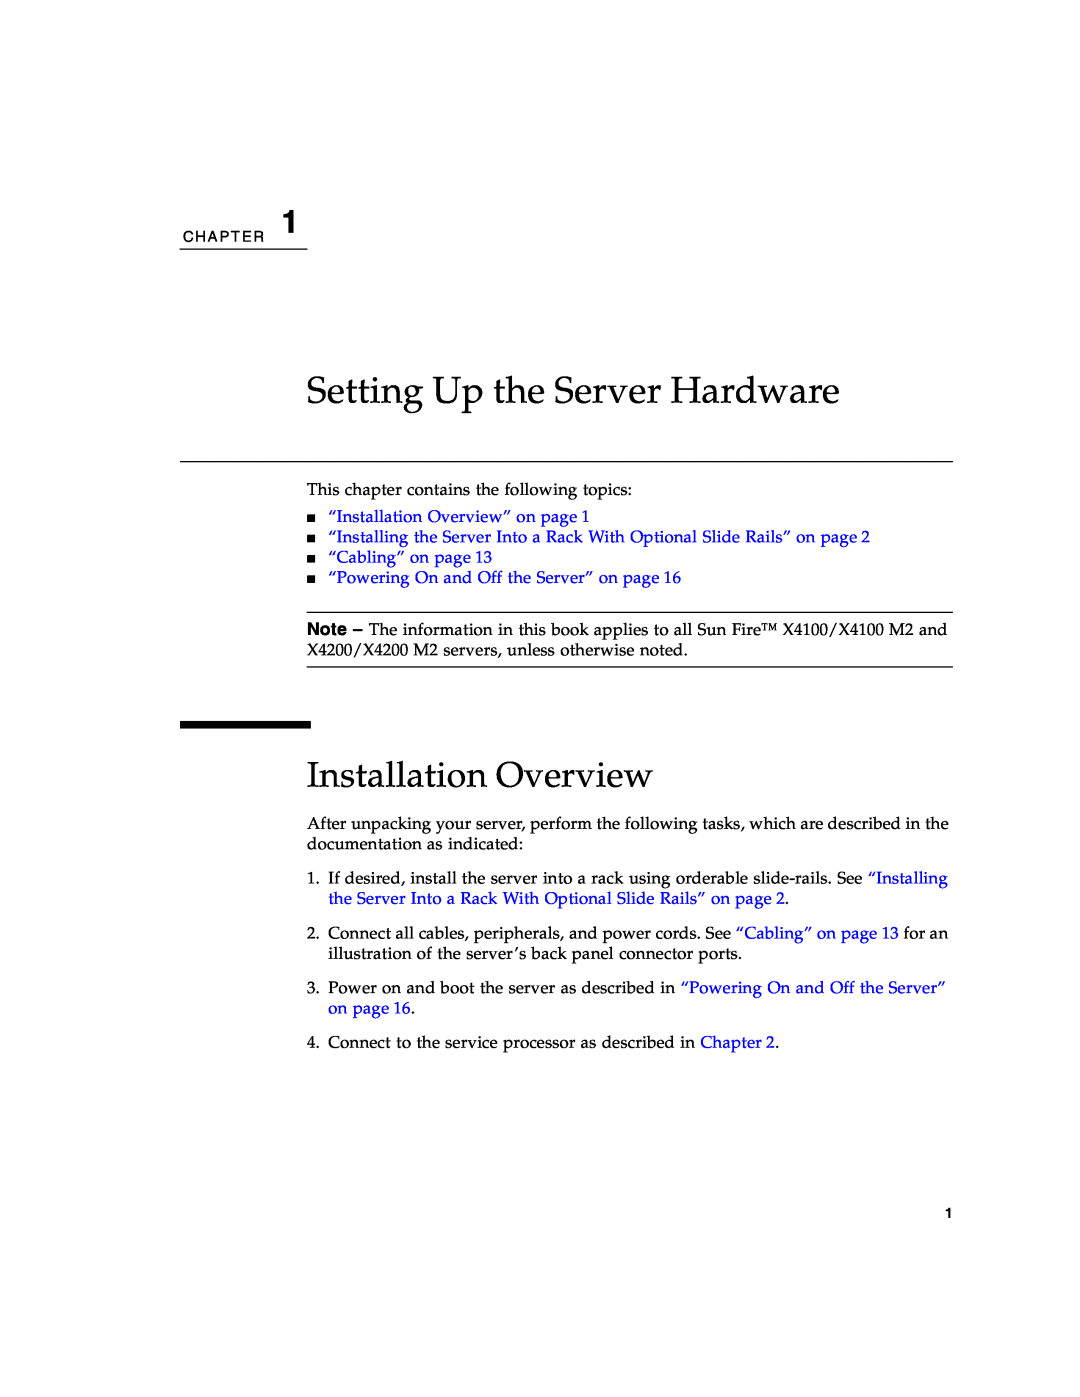 Sun Microsystems X4100 M2, X4200 M2 manual Setting Up the Server Hardware, “Installation Overview” on page 